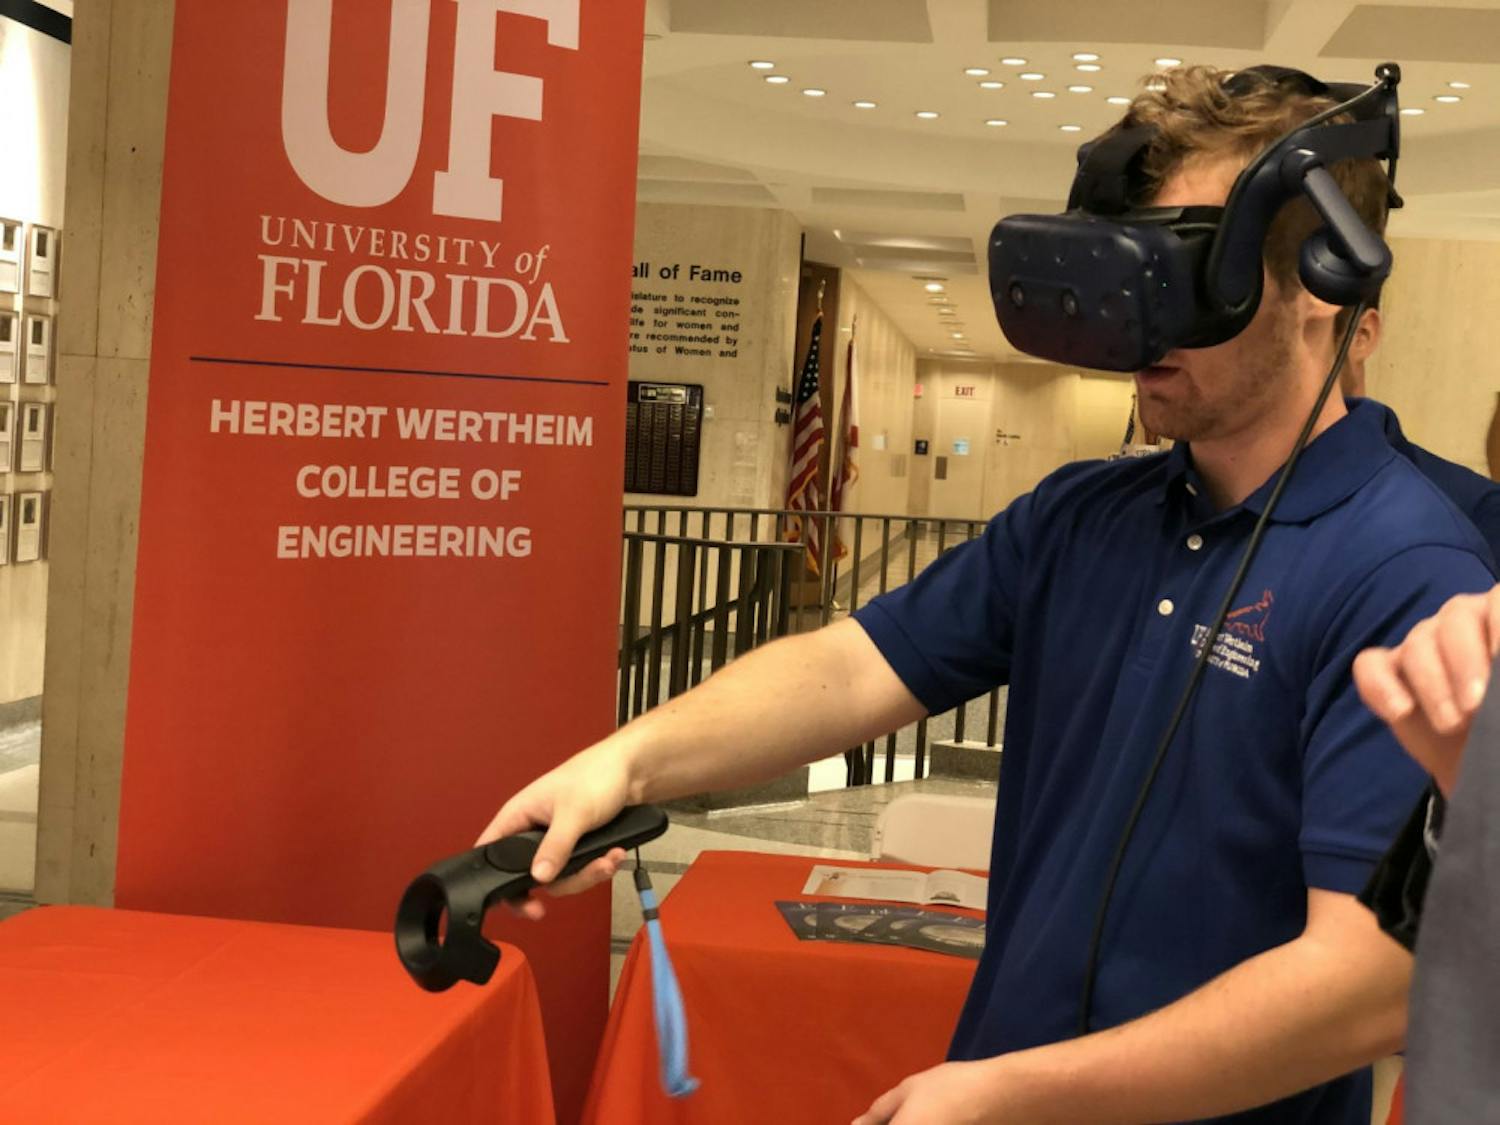 Adam Lizek, a 20-year-old UF computer science junior, uses virtual reality as part of the College of Engineering’s Gator Day display. The college is researching virtual reality applications in education to create smart classrooms, Lizek said.